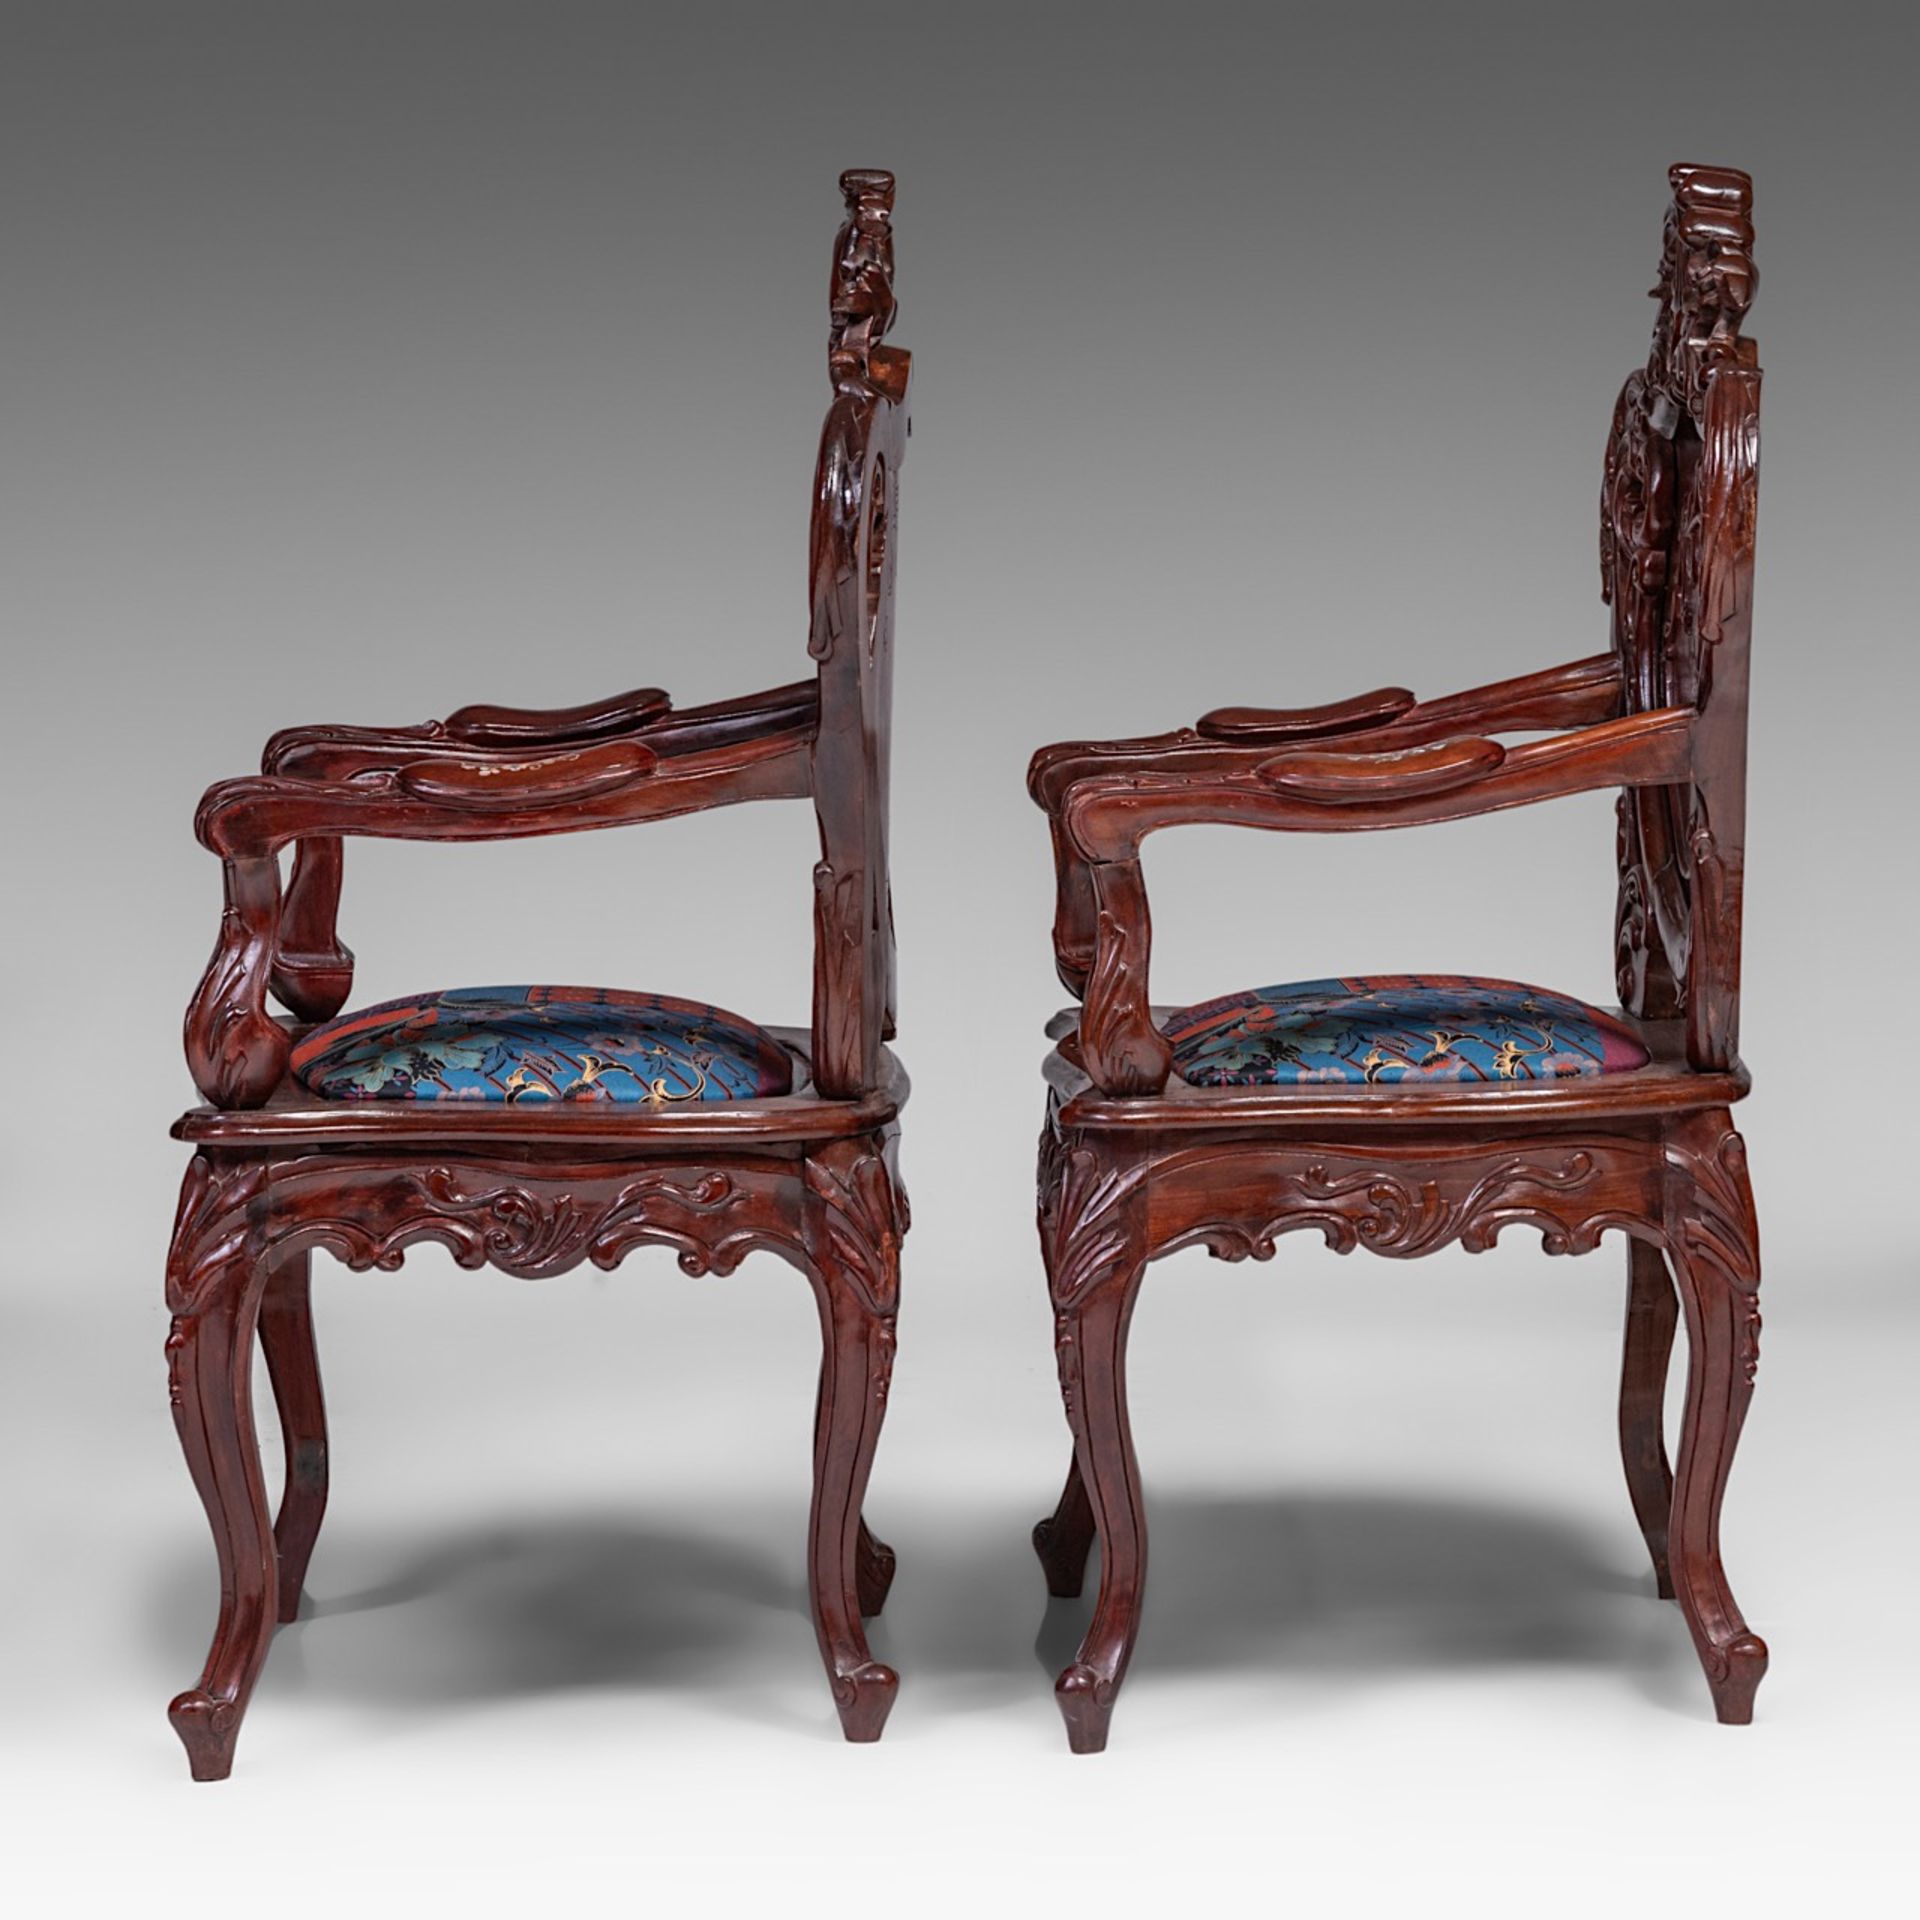 An Anglo-Chinese settee and two chairs, H settee 132 - H chair 108 cm - Image 8 of 24